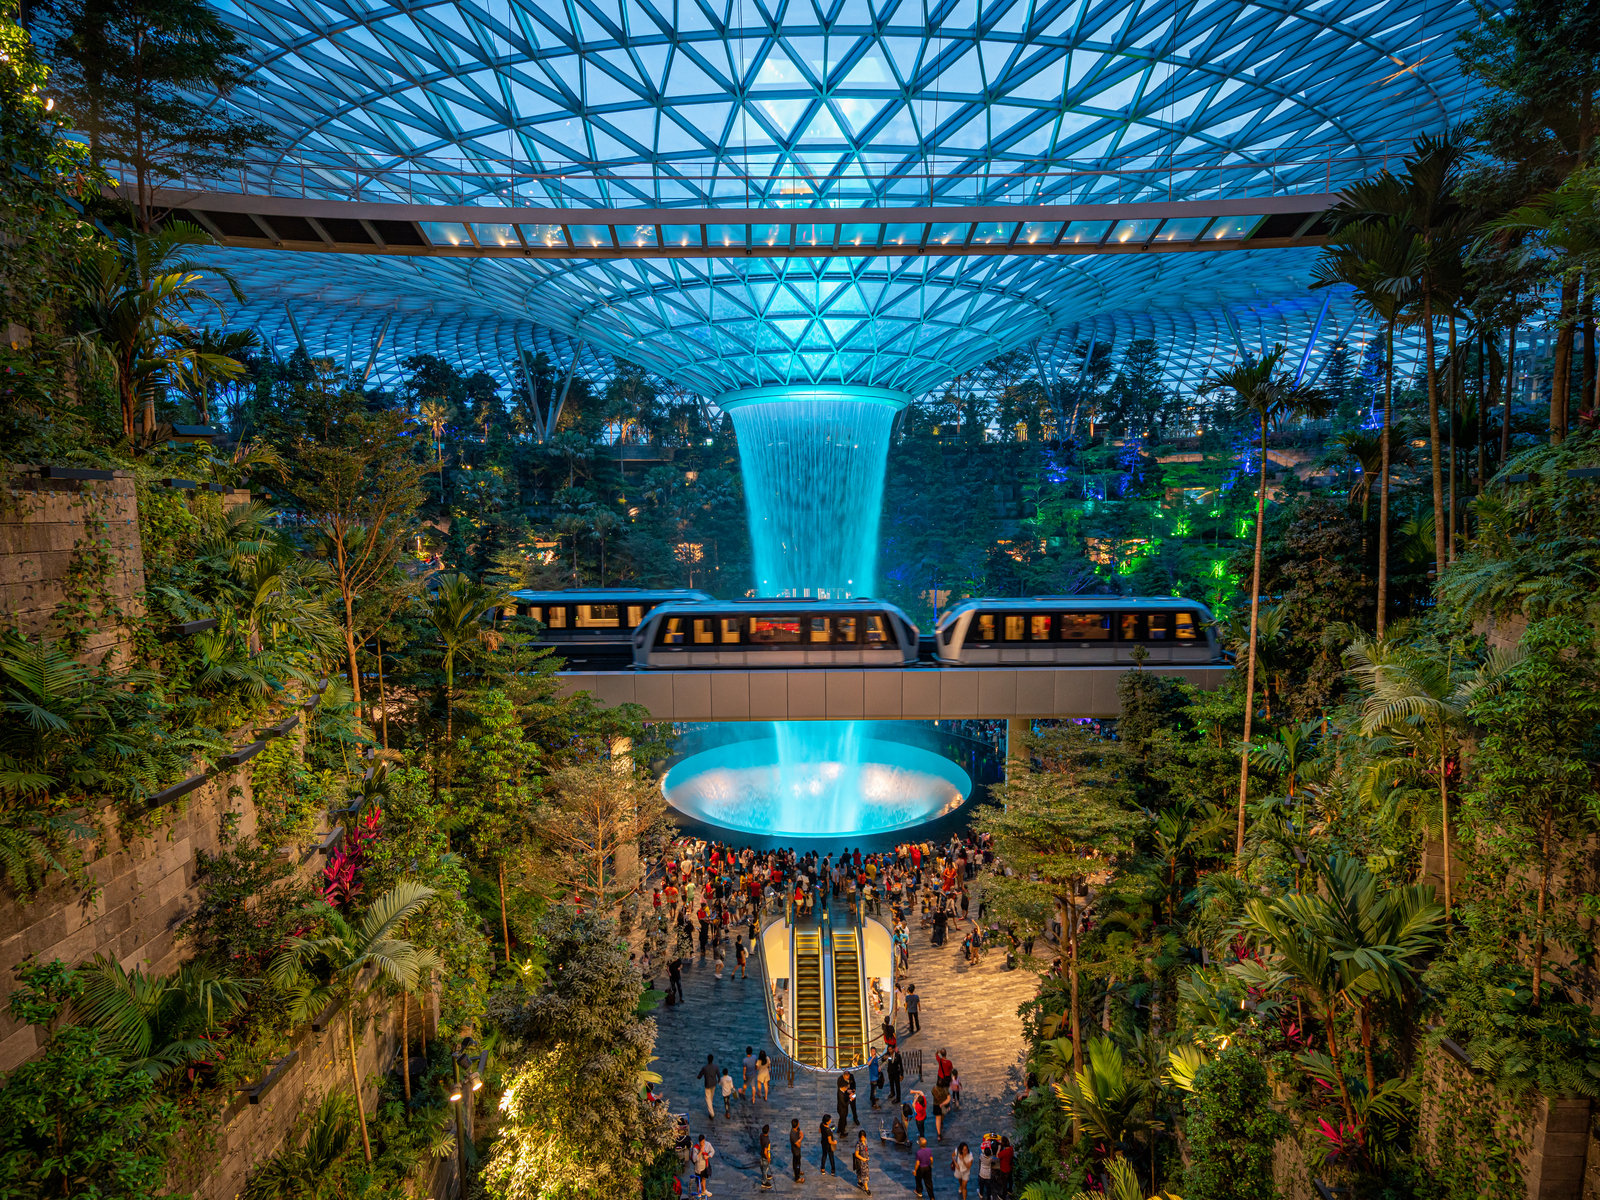 Singapore airport pictured with rain falling from the sky and a tram around it for a piece on the best time to visit Singapore